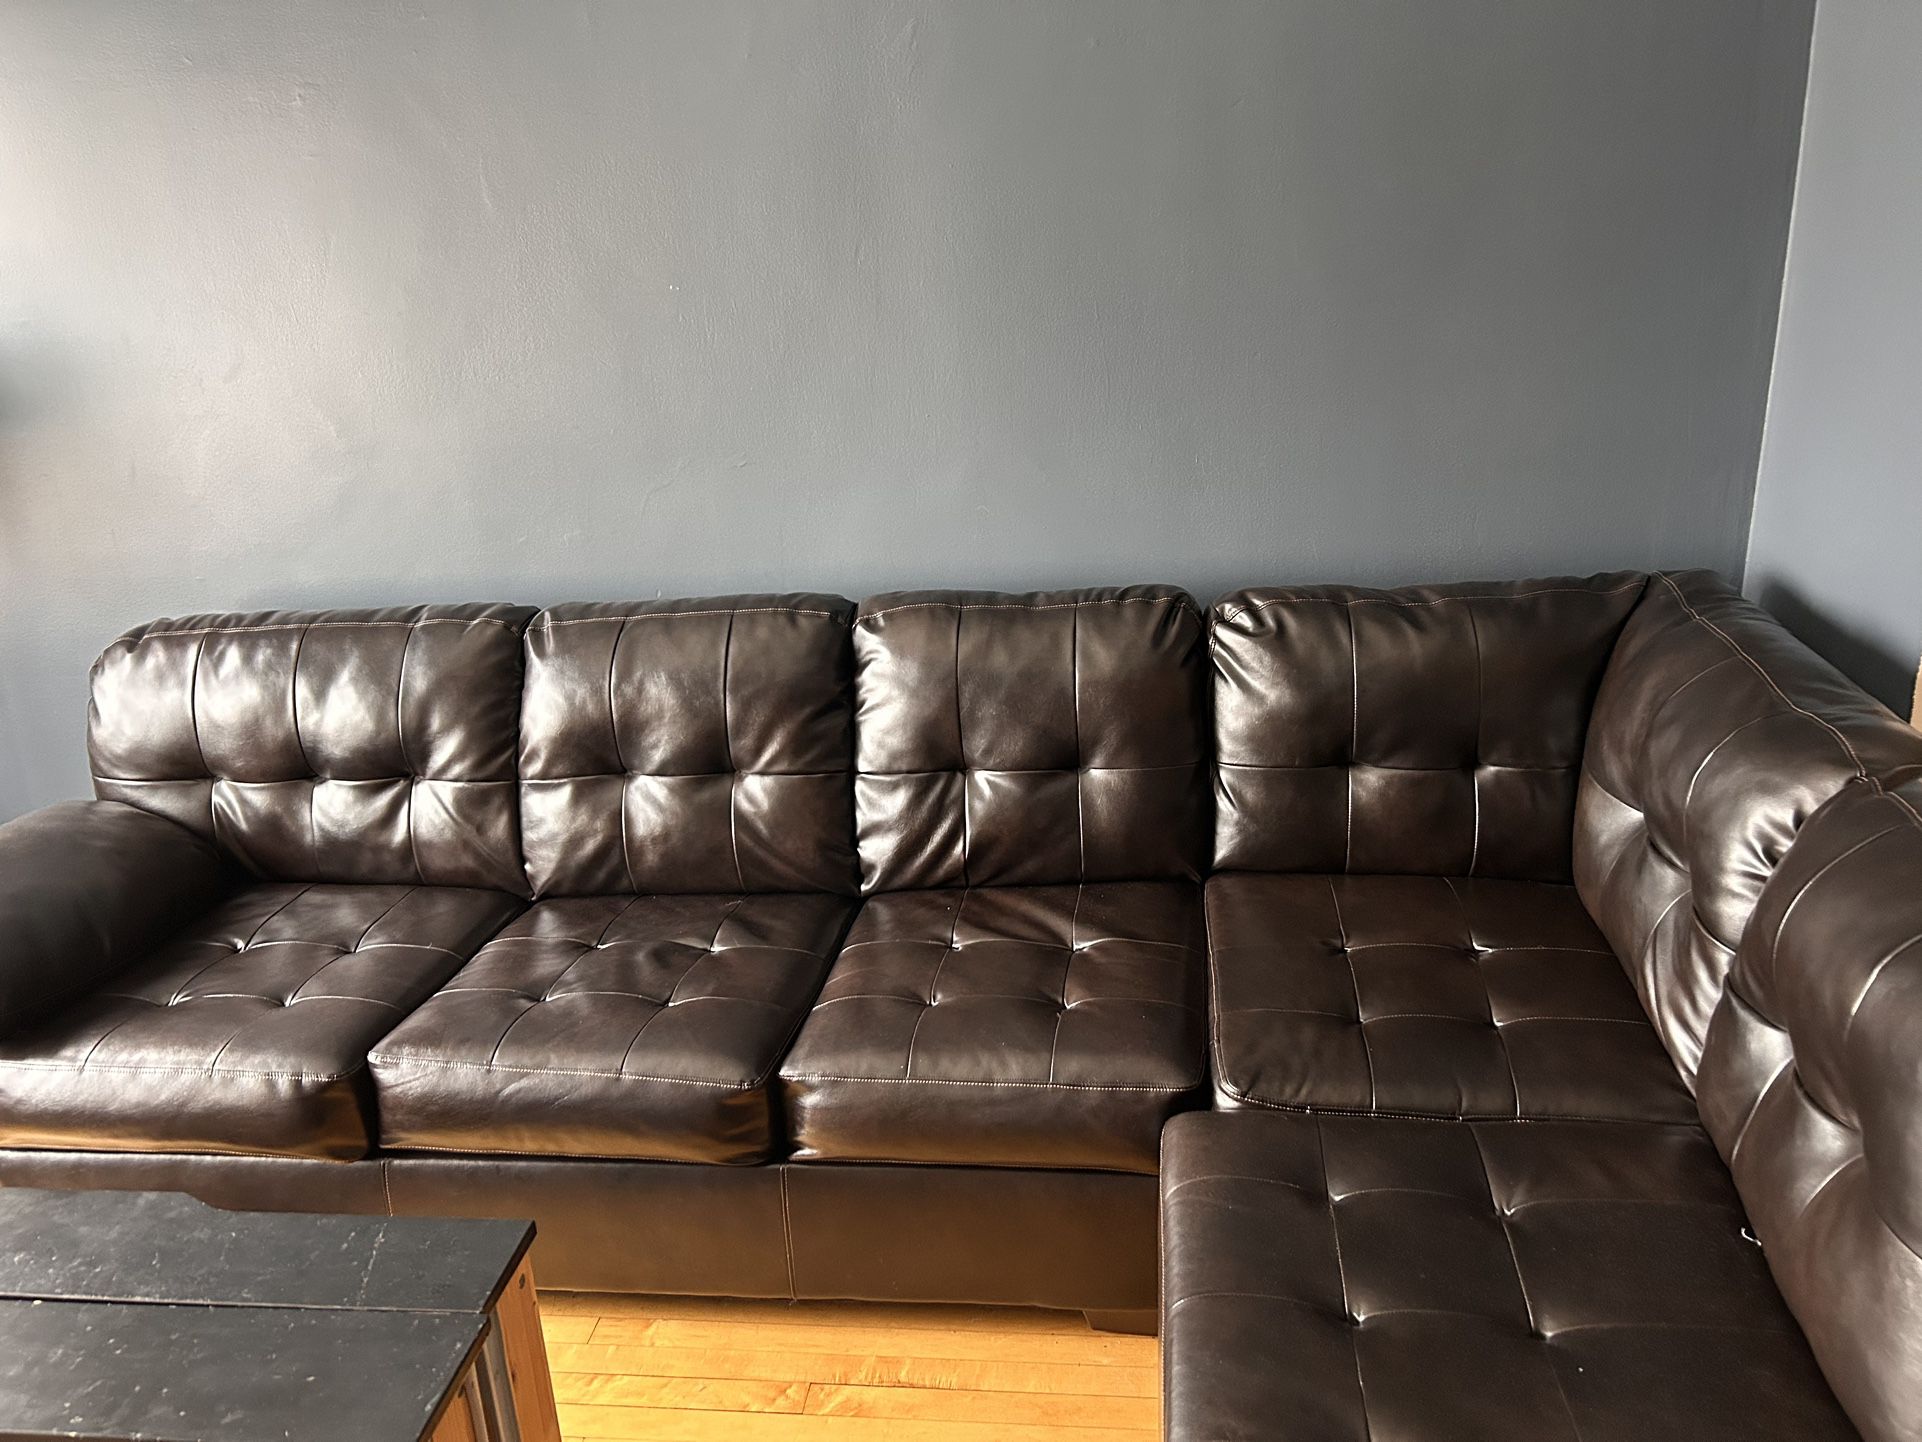 Couch & Ottoman 